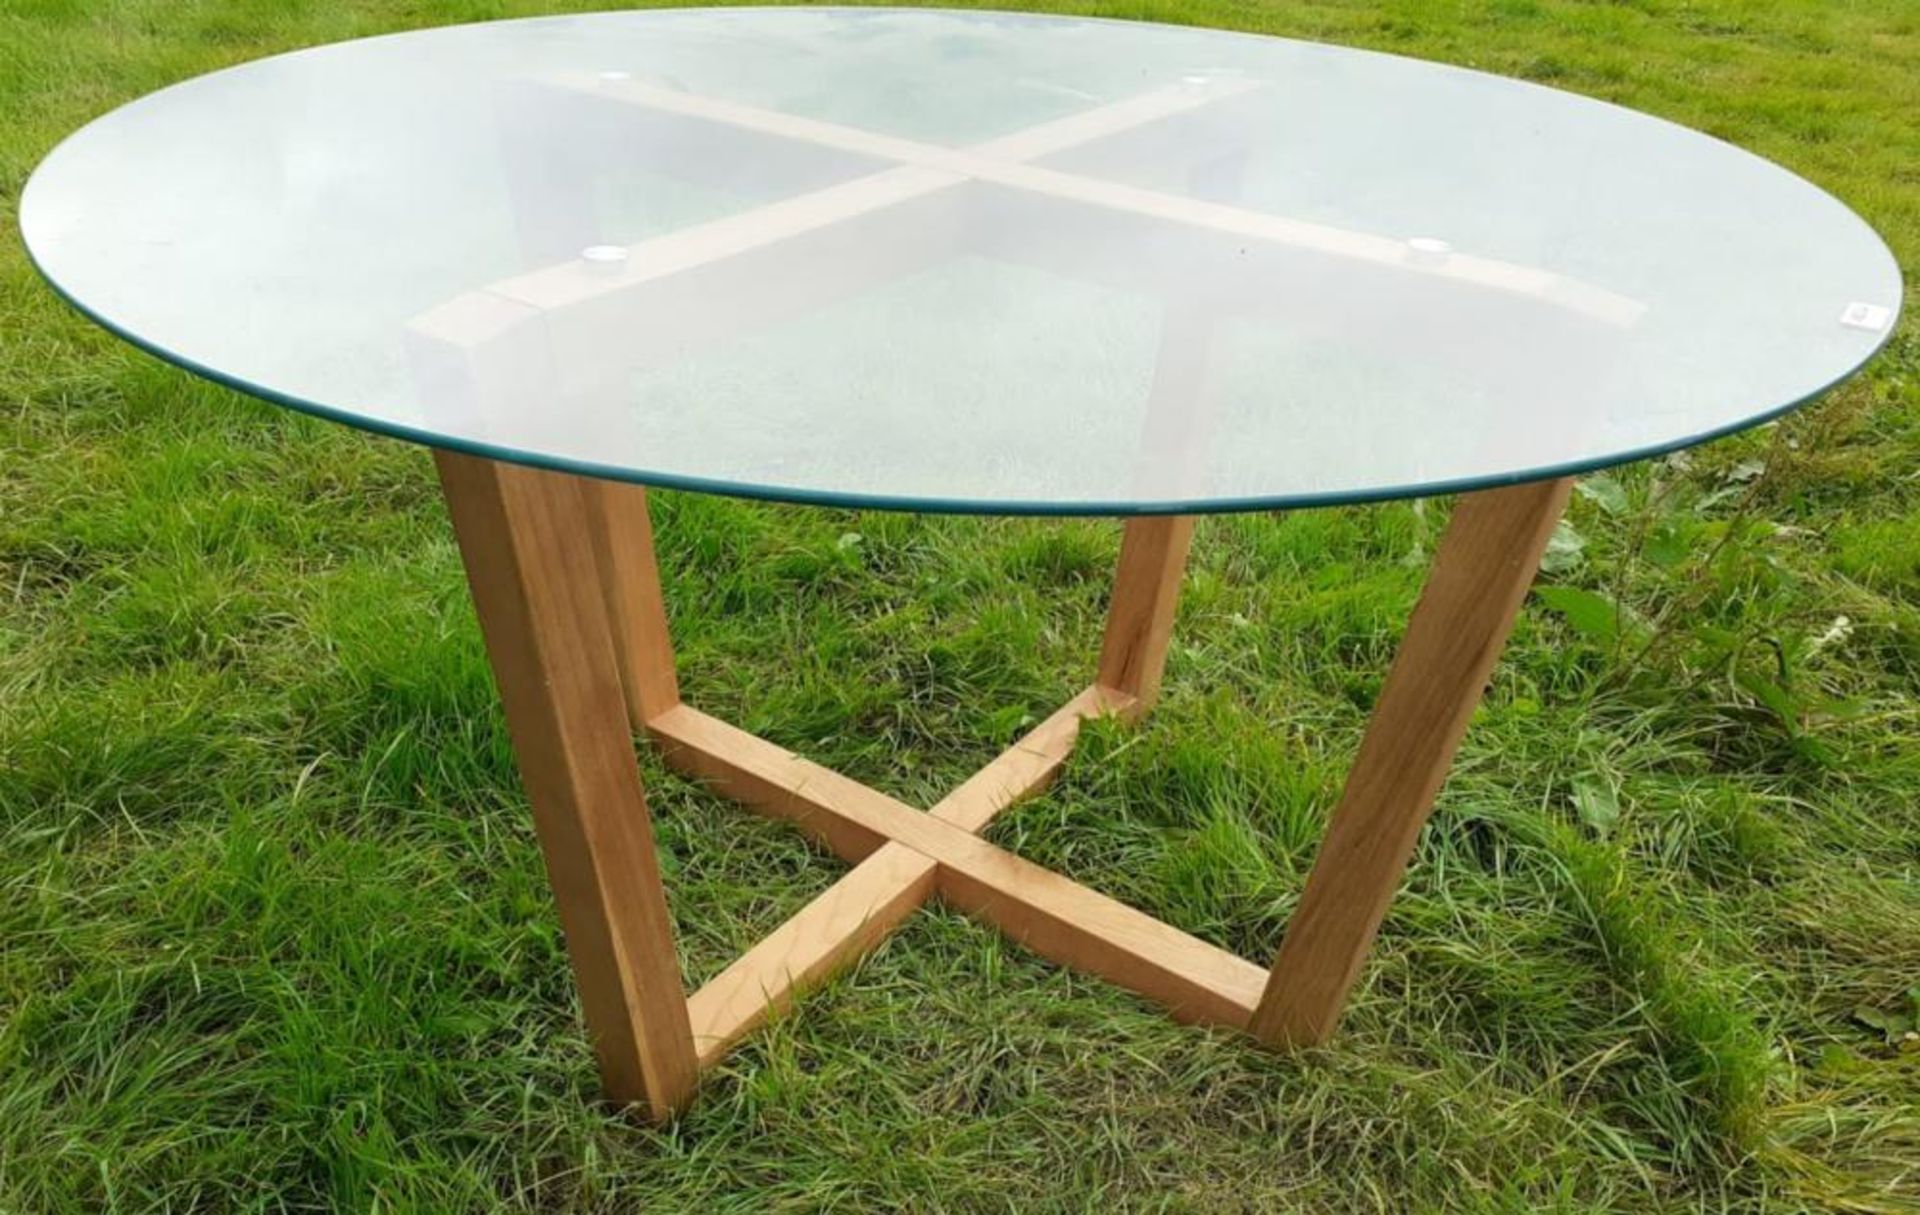 1 x Contemporary Round Glass Topped Dining Table and Wood Base - Dimensions: Top Diameter 135cm x